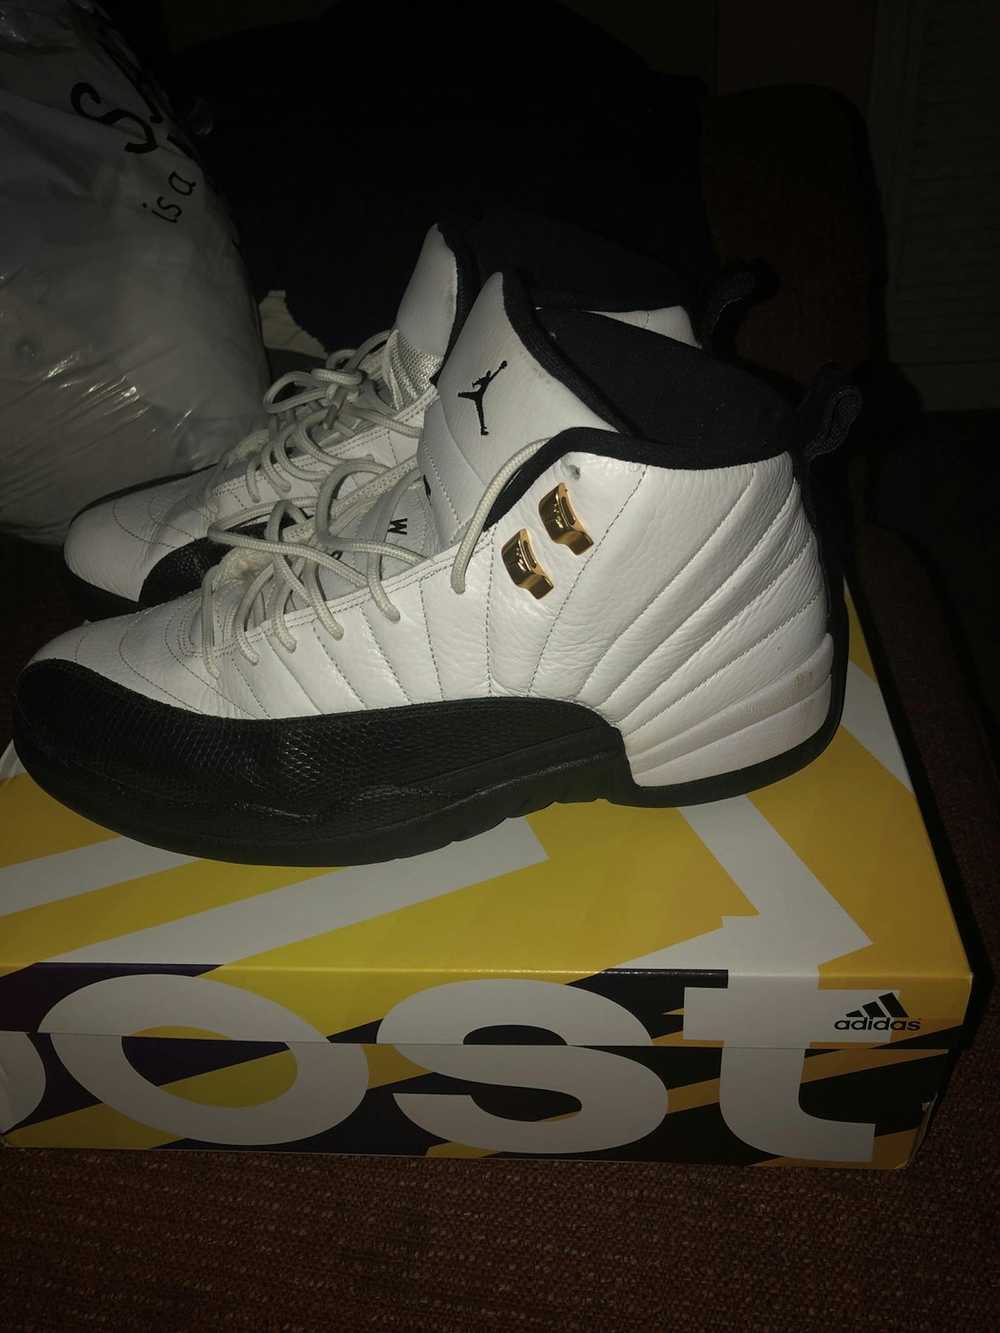 Nike Taxi 12s - image 3